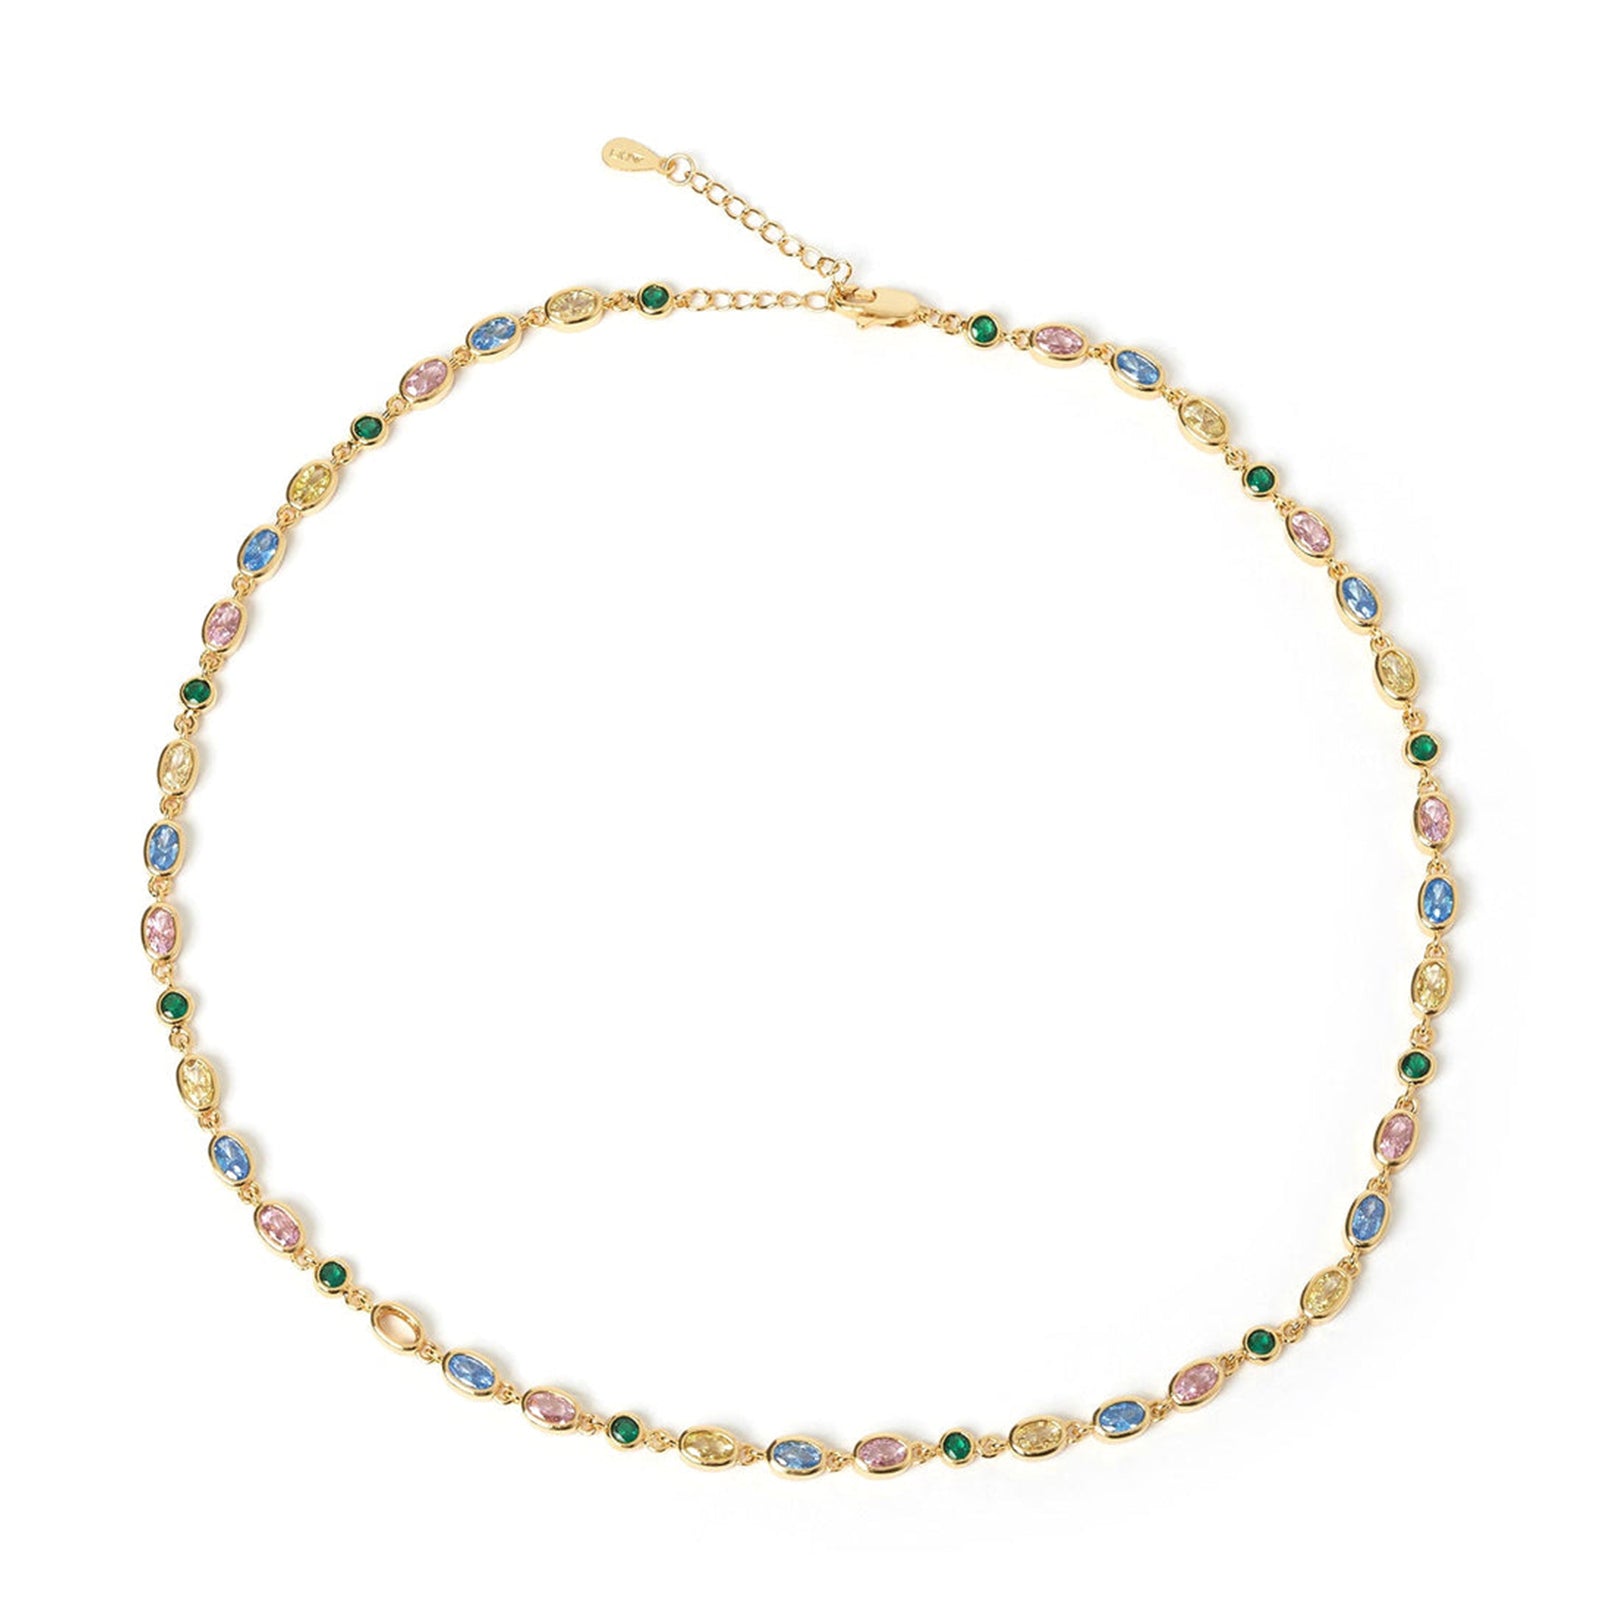 Arms Of Eve vibrant Isadora gold necklace adorned with multicolored beads for a playful and eye-catching accessory